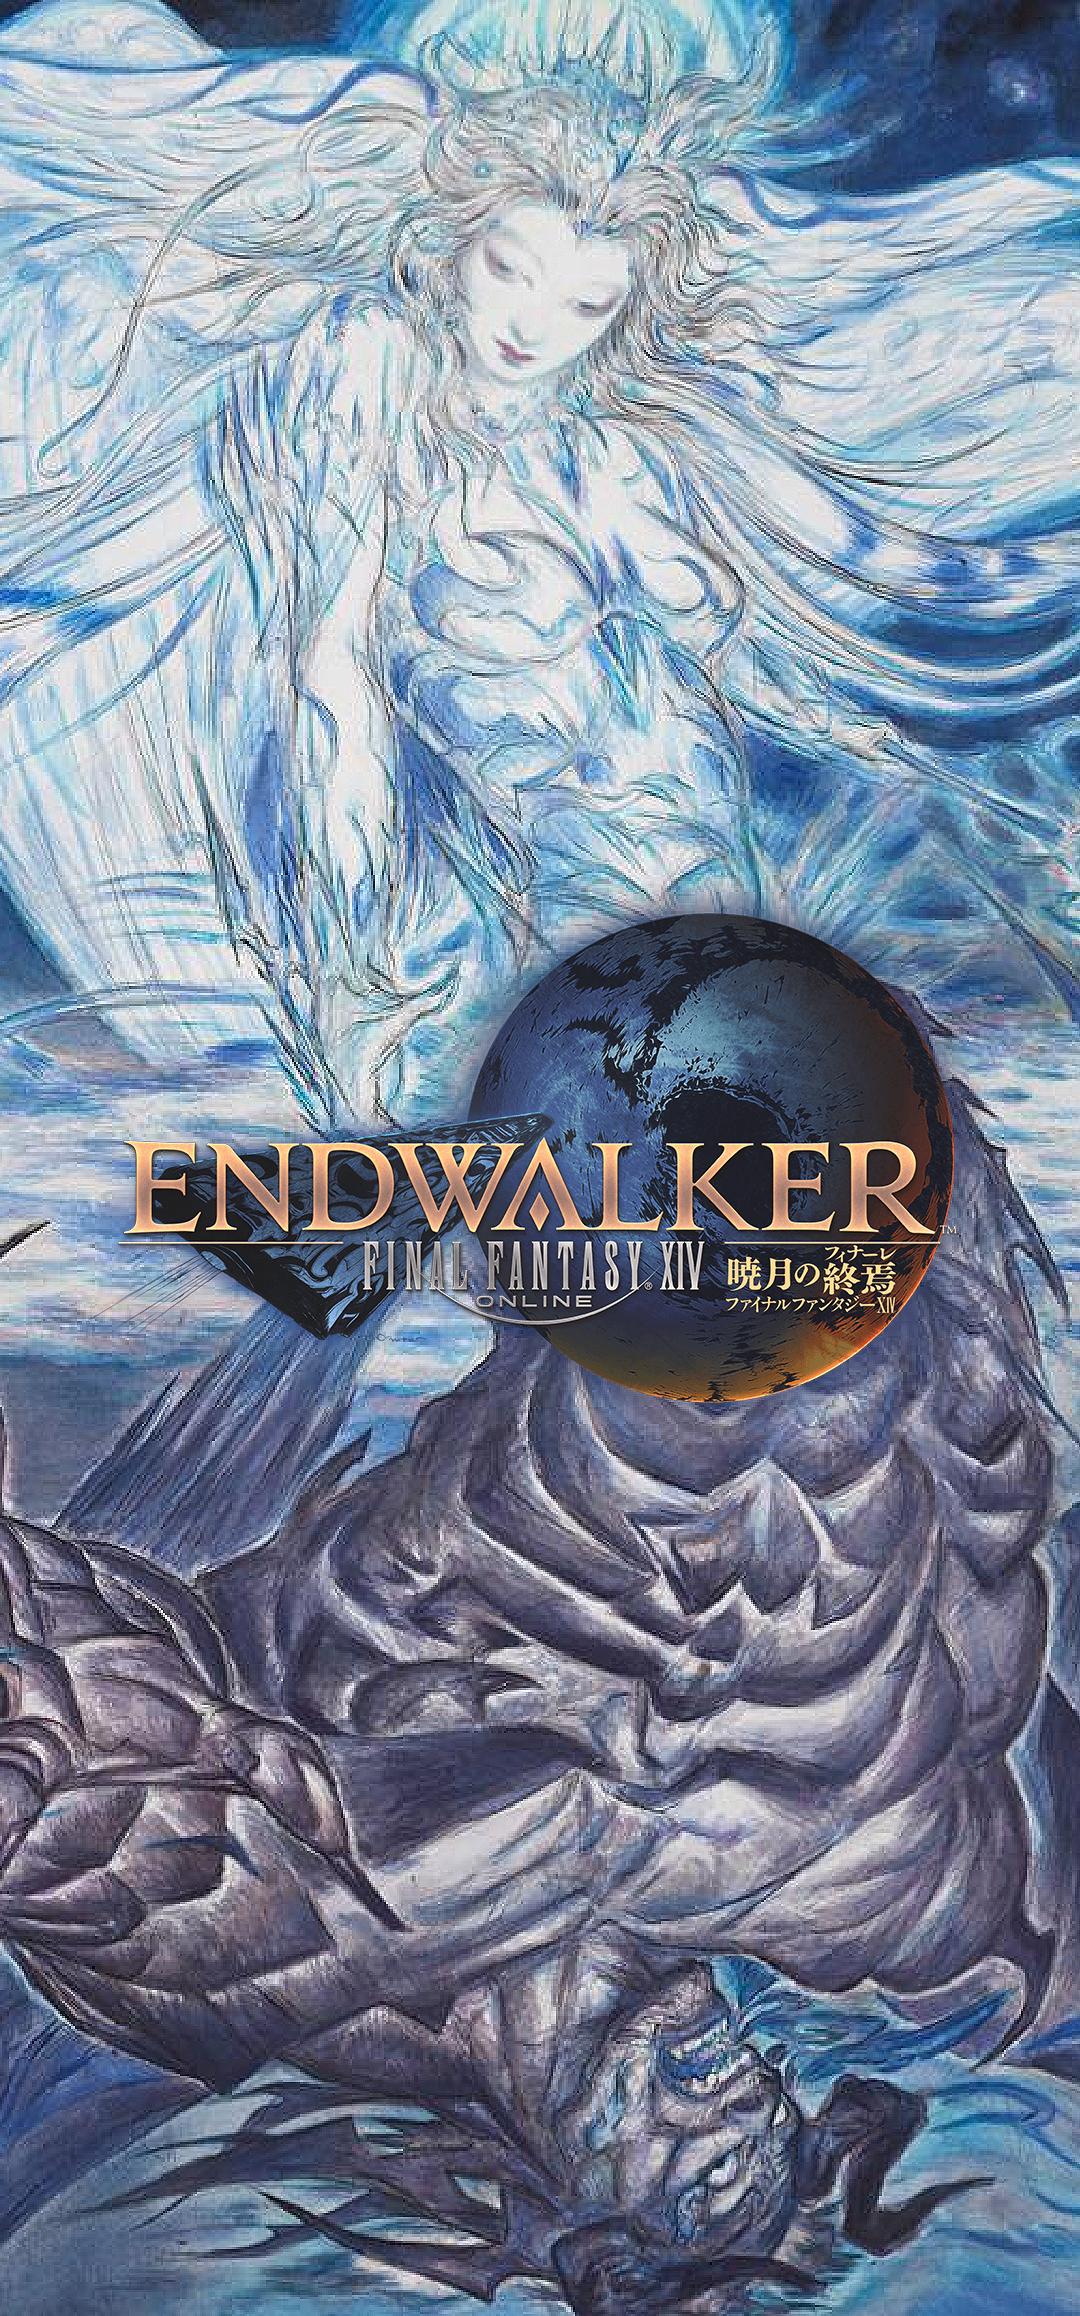 Here's a quick wallpaper combining the Endwalker logo and Amano artwork that works well on mobile